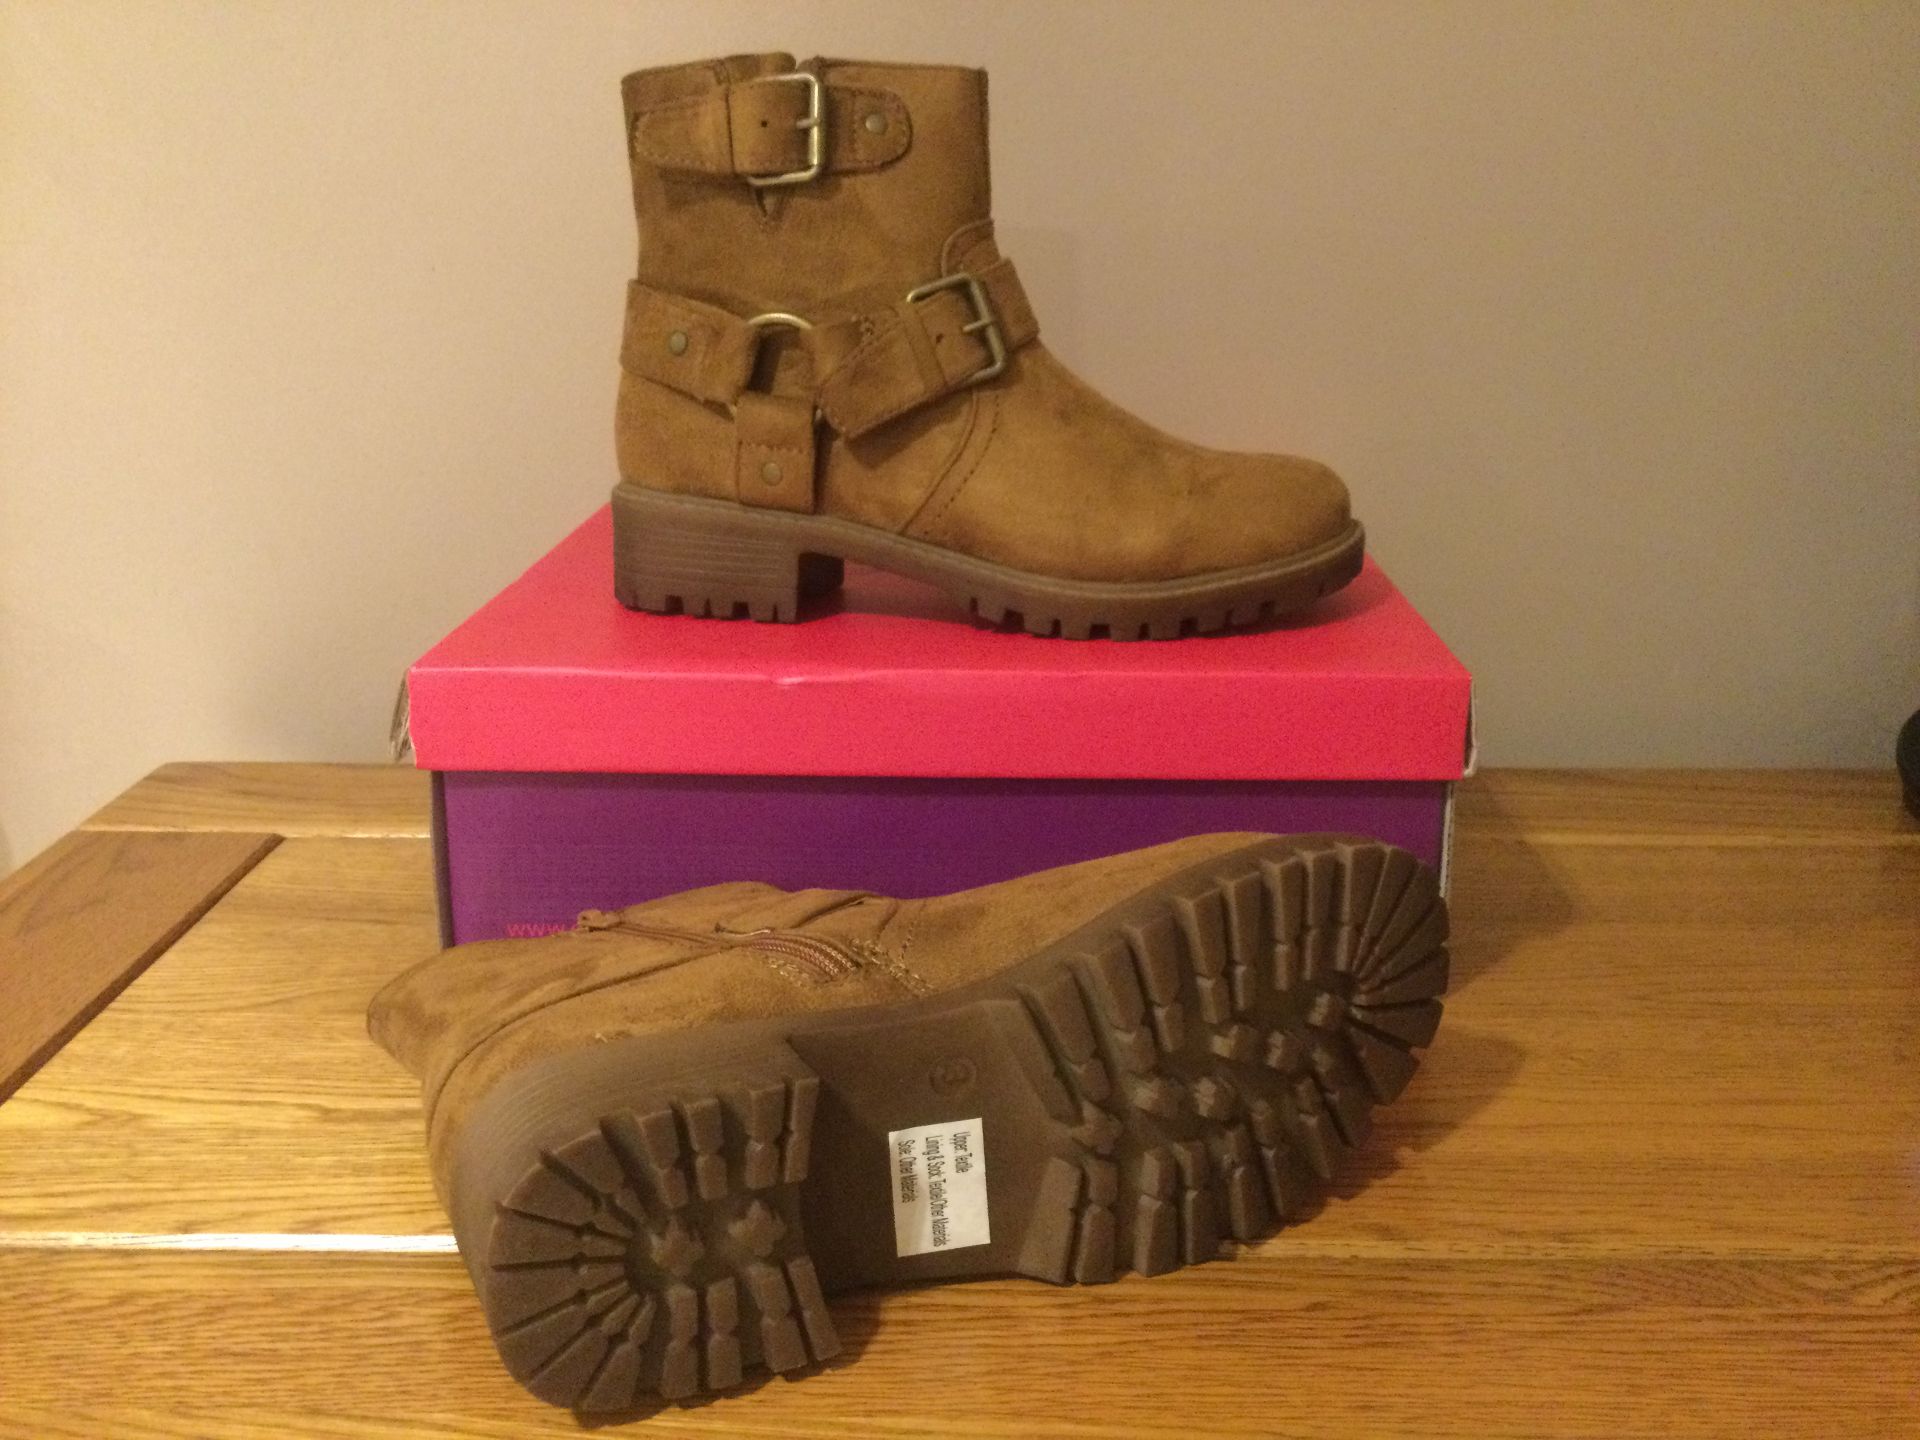 Dolcis “Davis” Ankle Boots, Size 3, Tan - New RRP £49.00 - Image 3 of 5